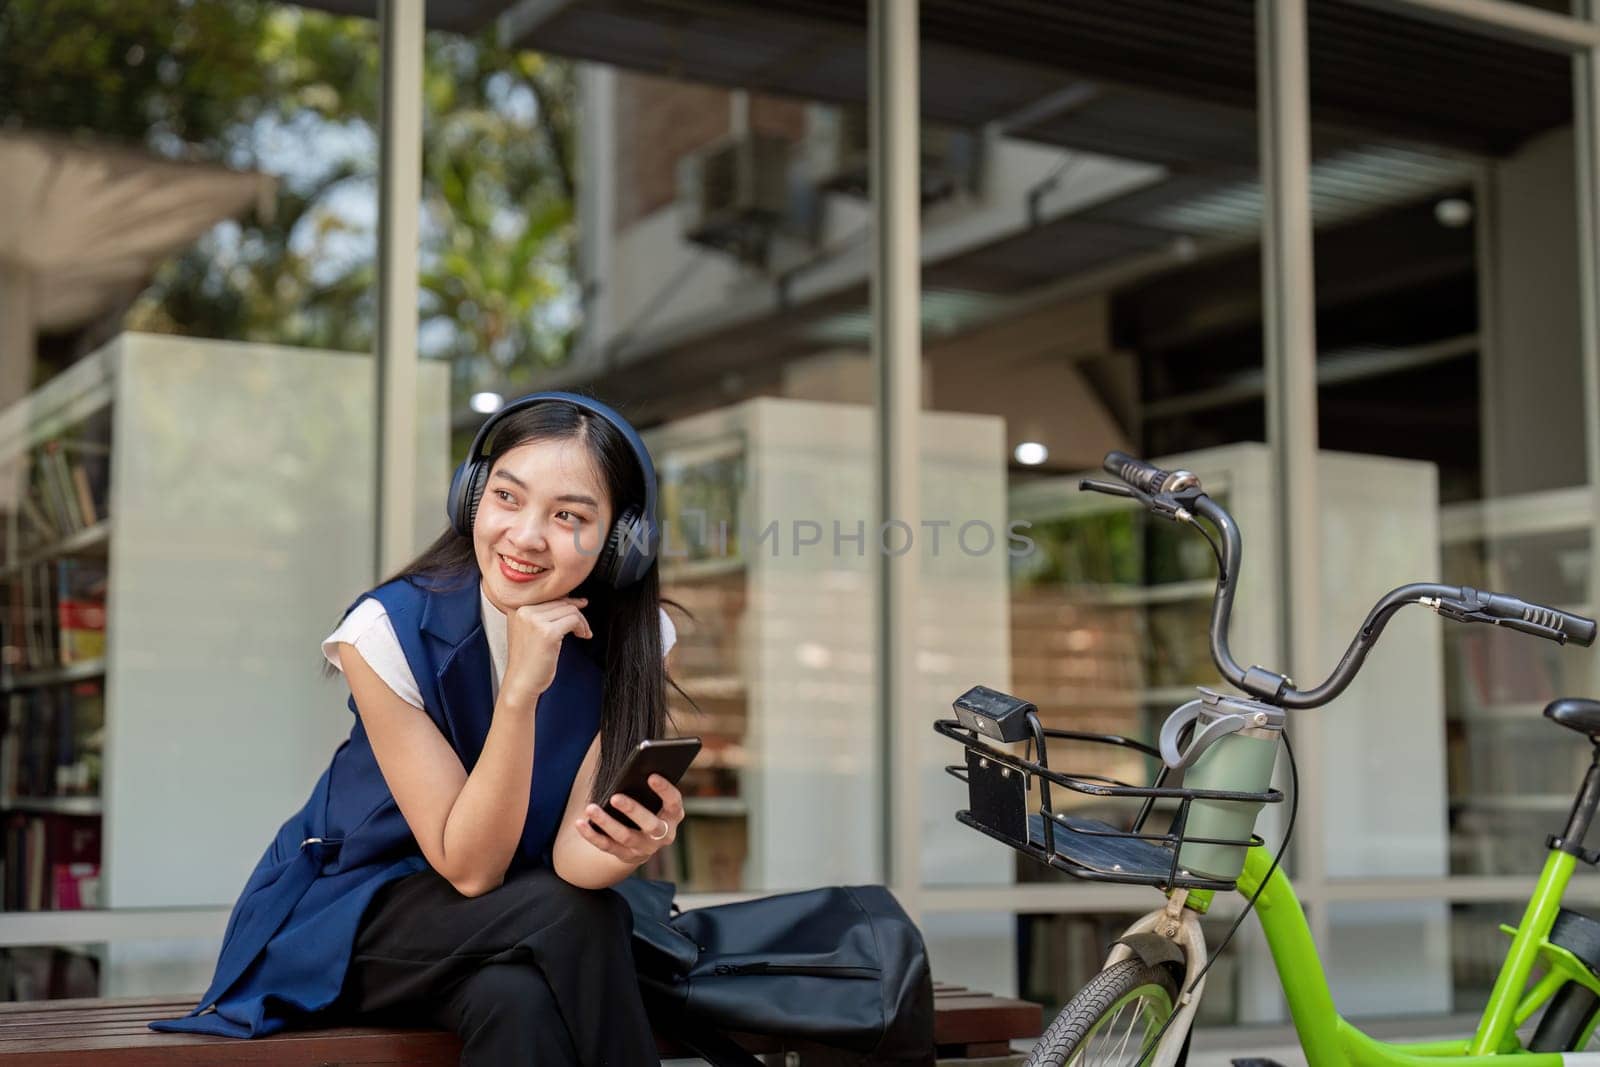 Smiling businesswoman with headphones relaxing with her bicycle outside office. Concept of modern urban commuting, relaxation, and productivity by nateemee